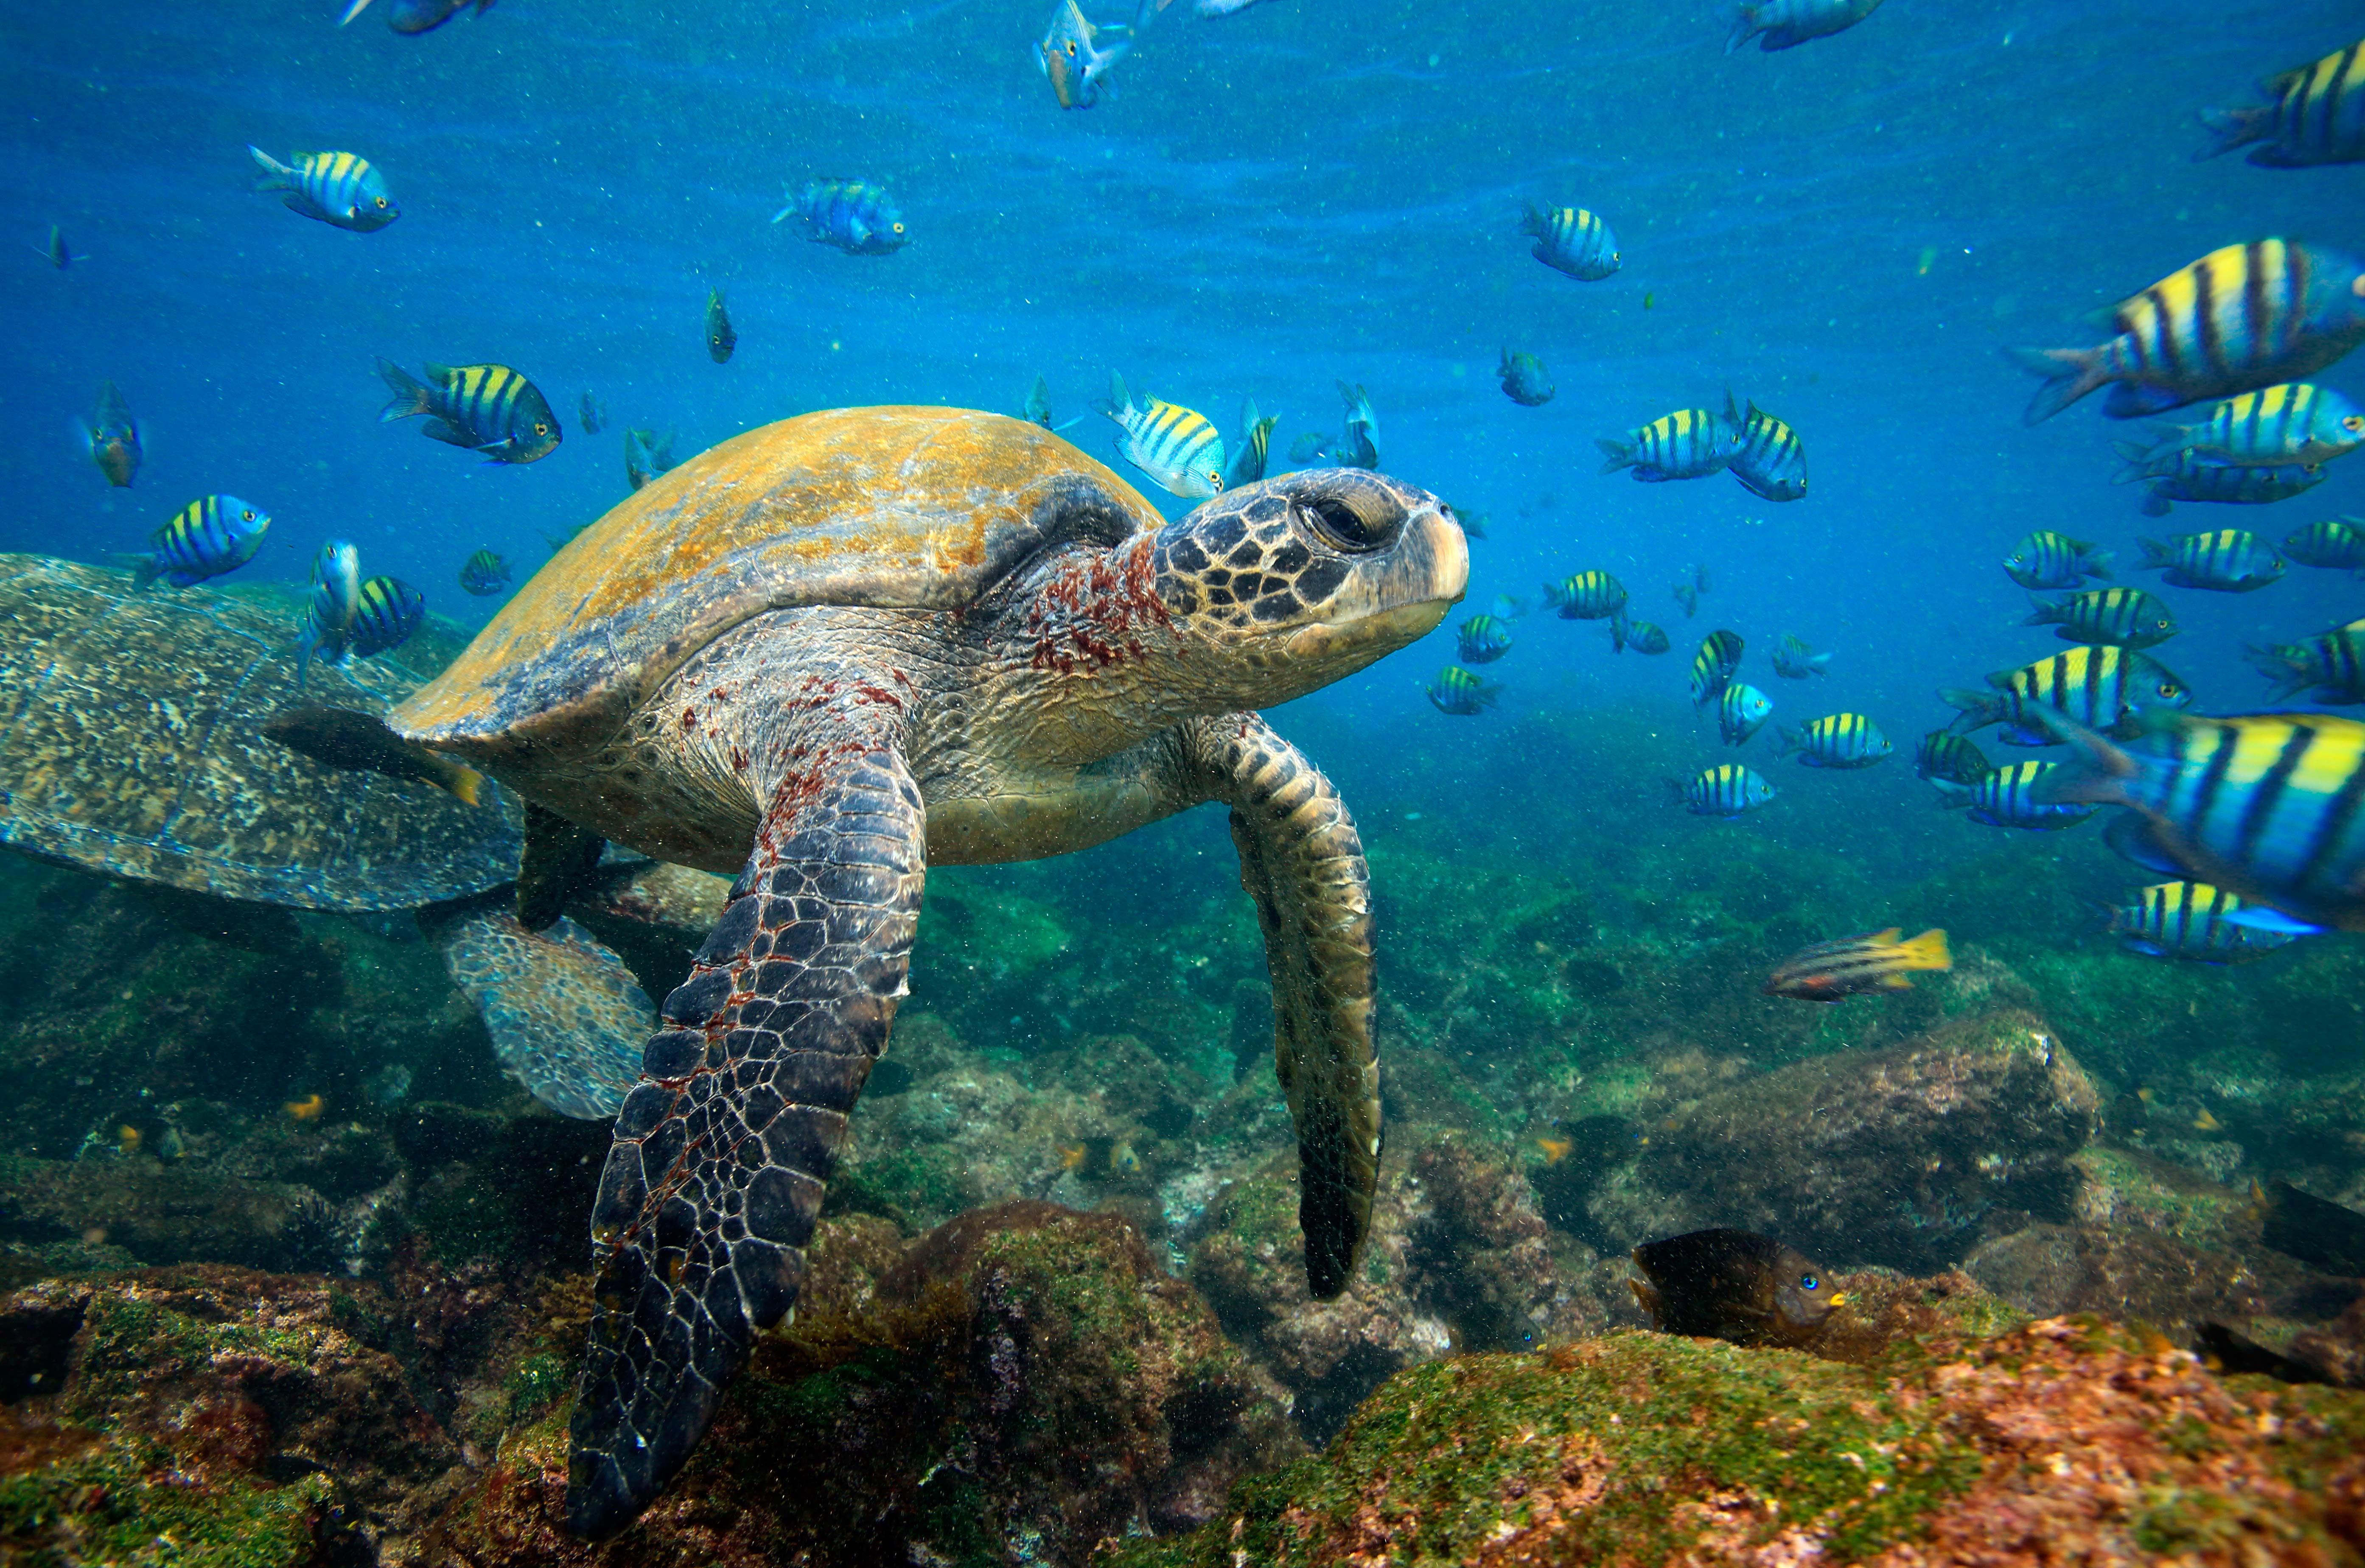 A sea turtle in a lagoon near the Galápagos. Image by Paul Kennedy / Lonely Planet Images / Getty